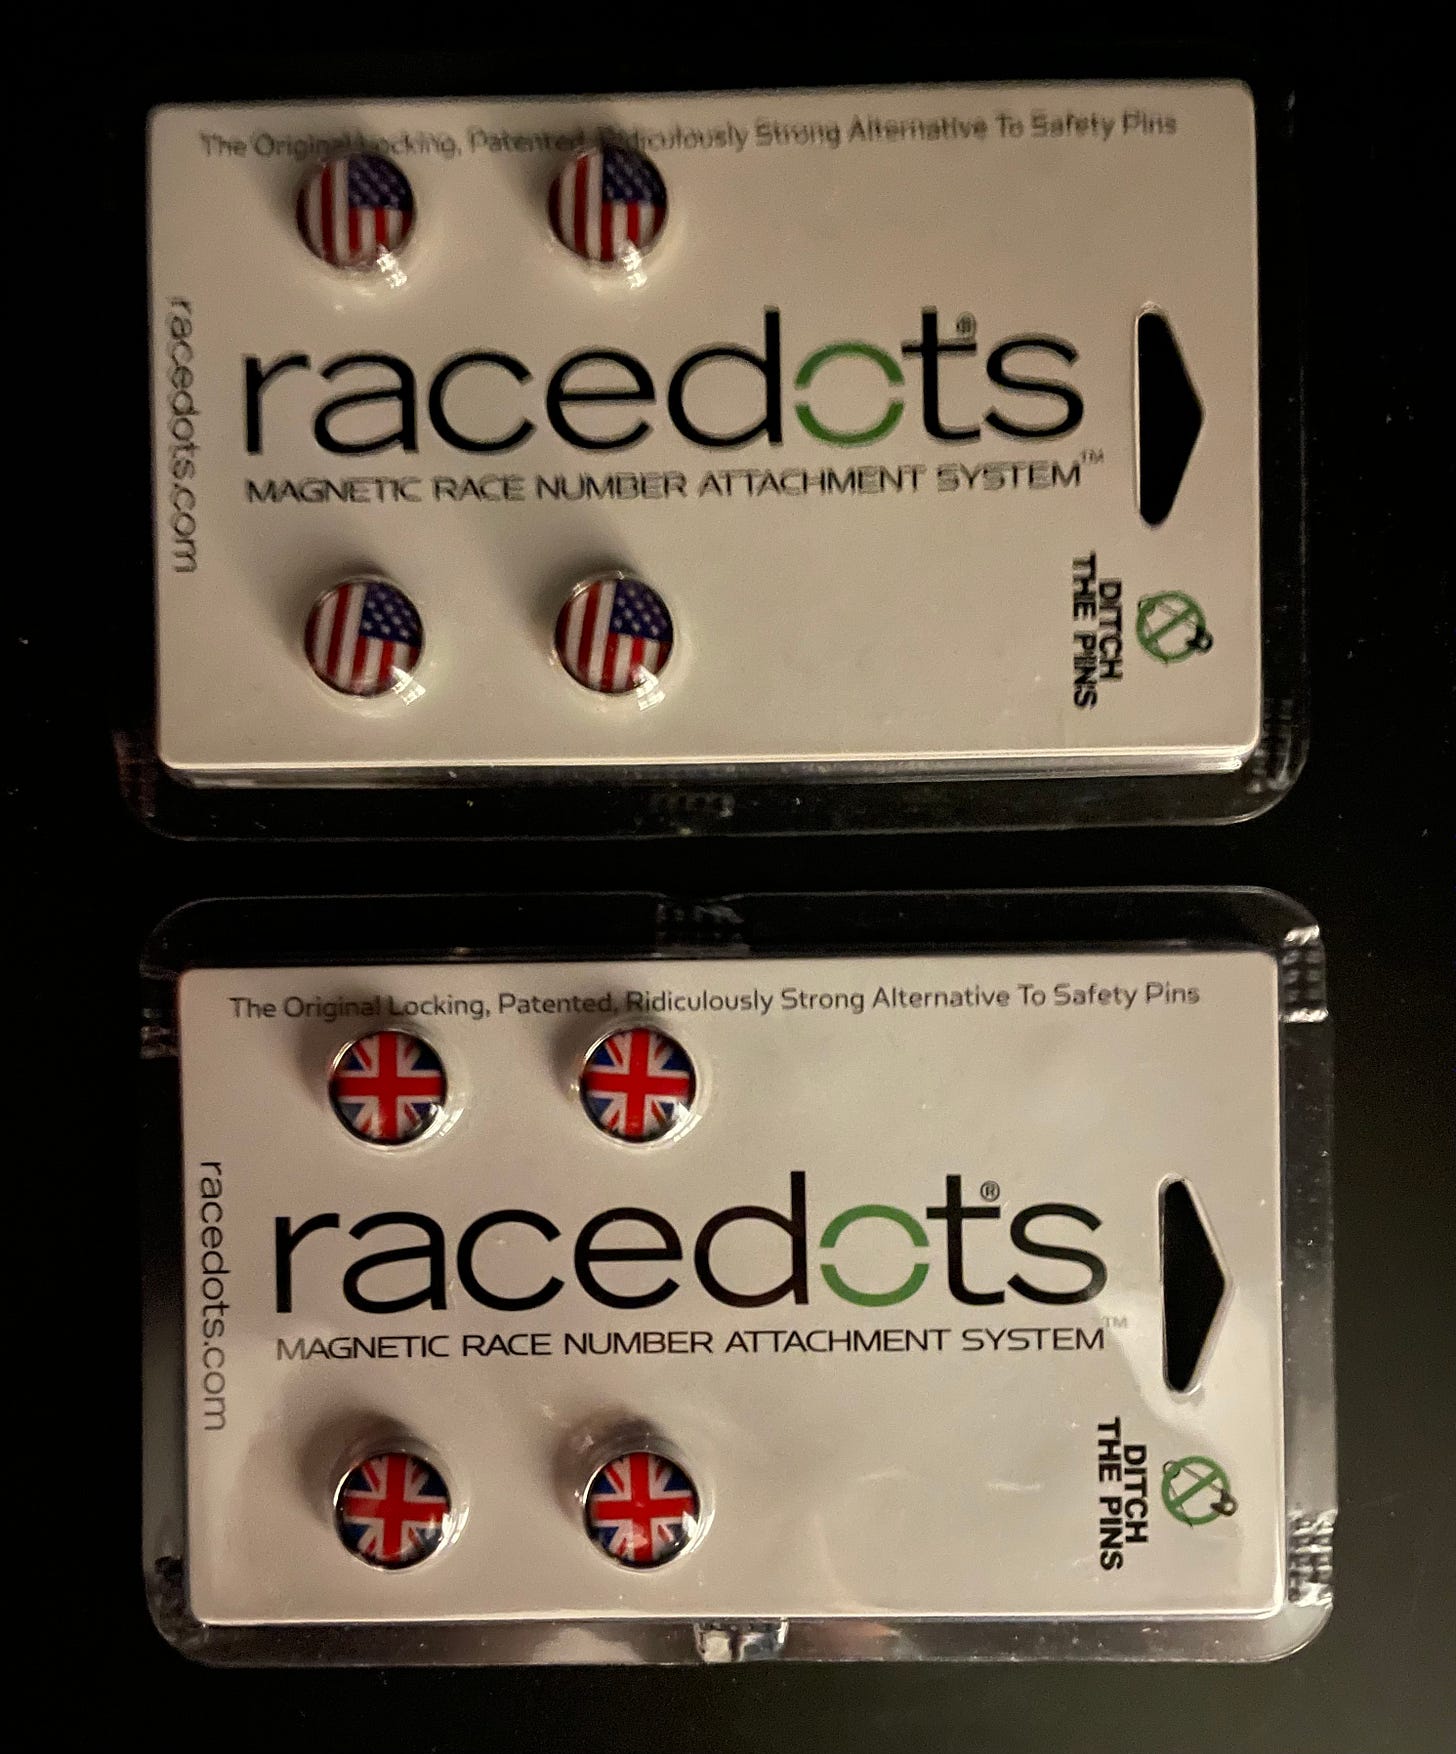 Race Dots with American and British flag icons